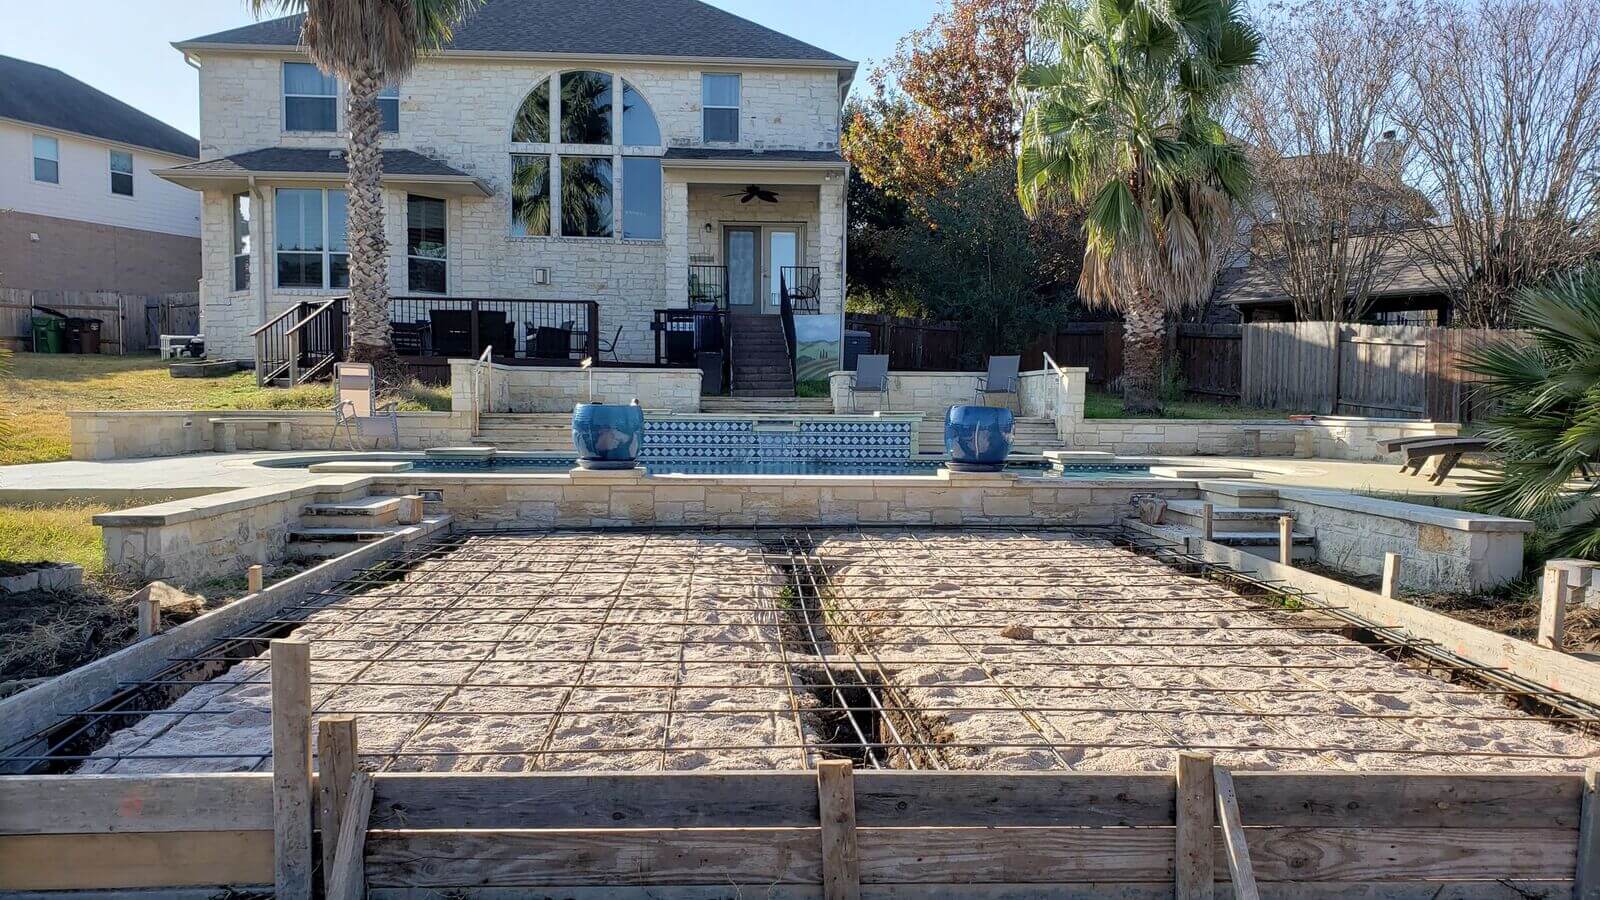 During construction of backyard pool